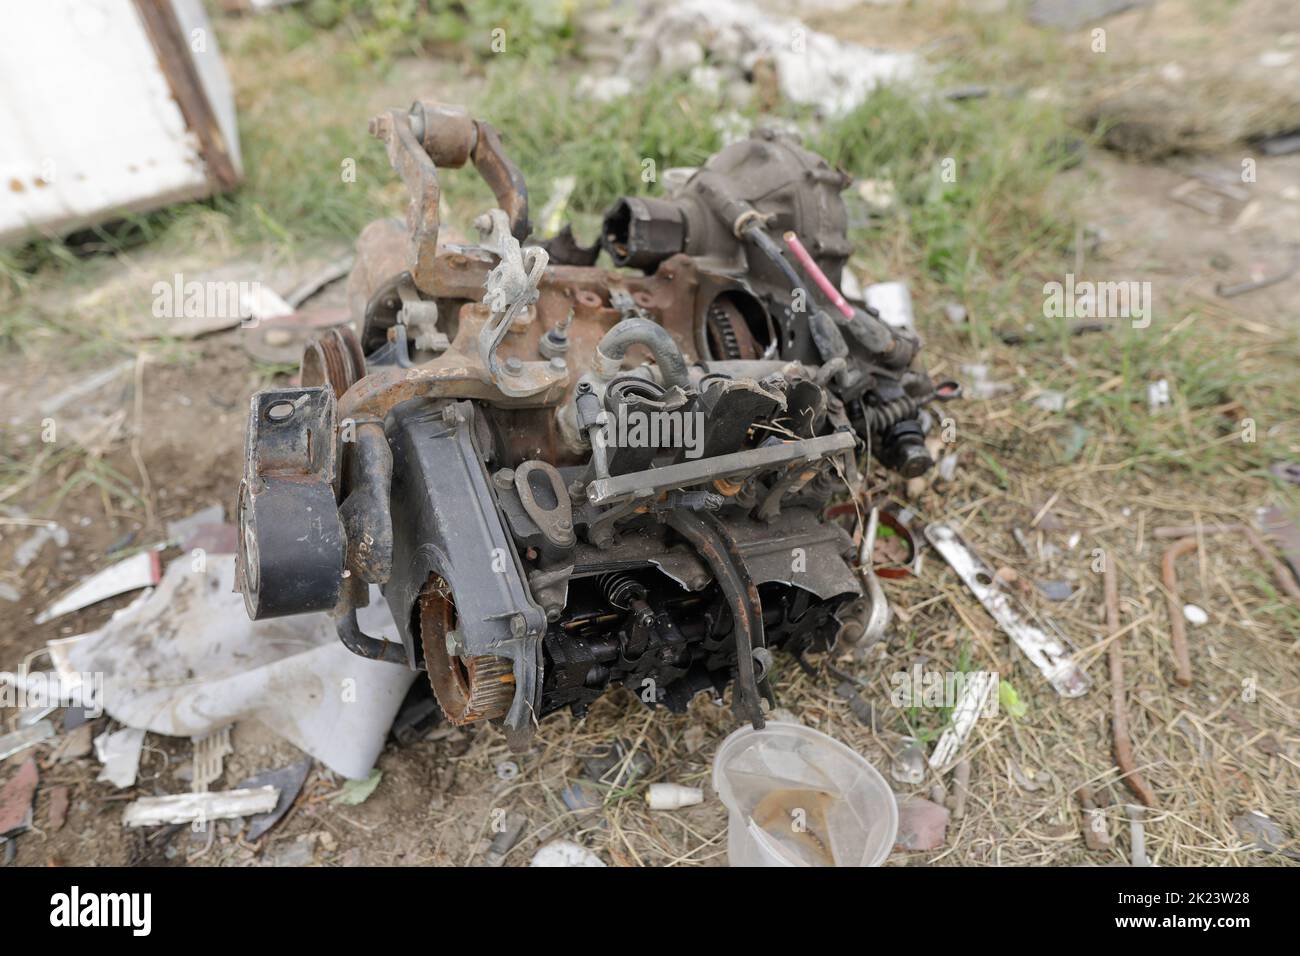 Sarulesti, Romania - September 22, 2022: Details with car engines on the ground inside a scrap yard. Stock Photo